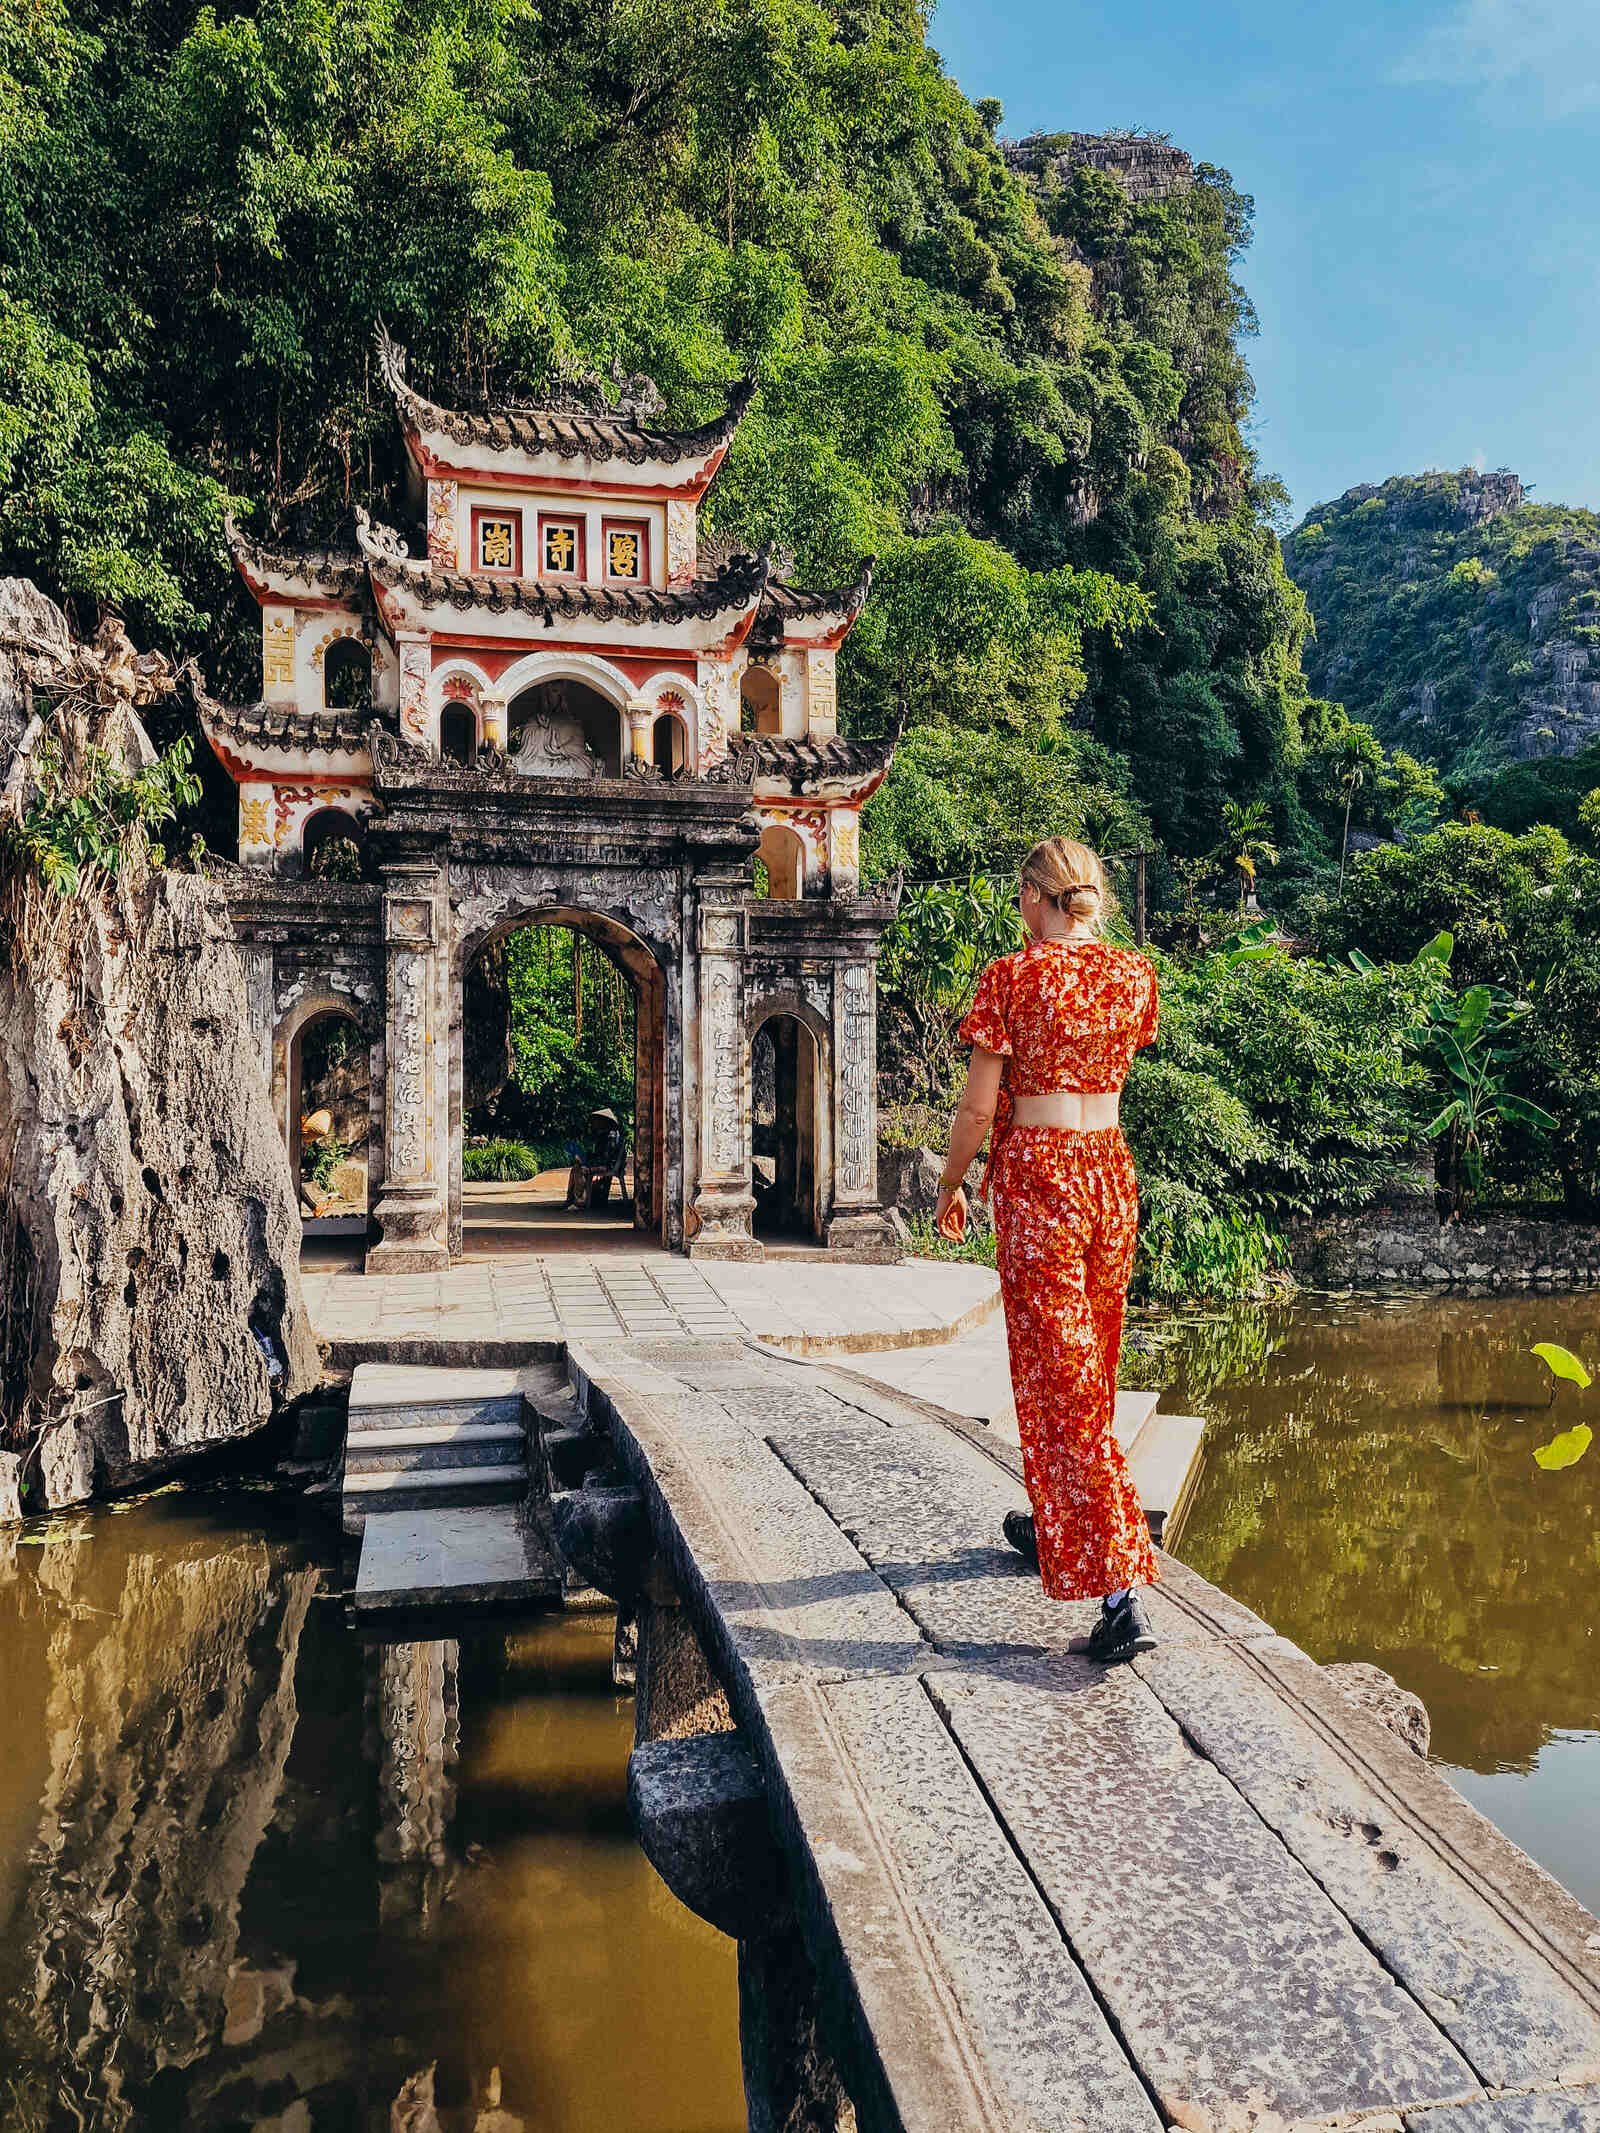 Helena walking across a stone bridge to an ancient pagoda archway surrounded by cliffs